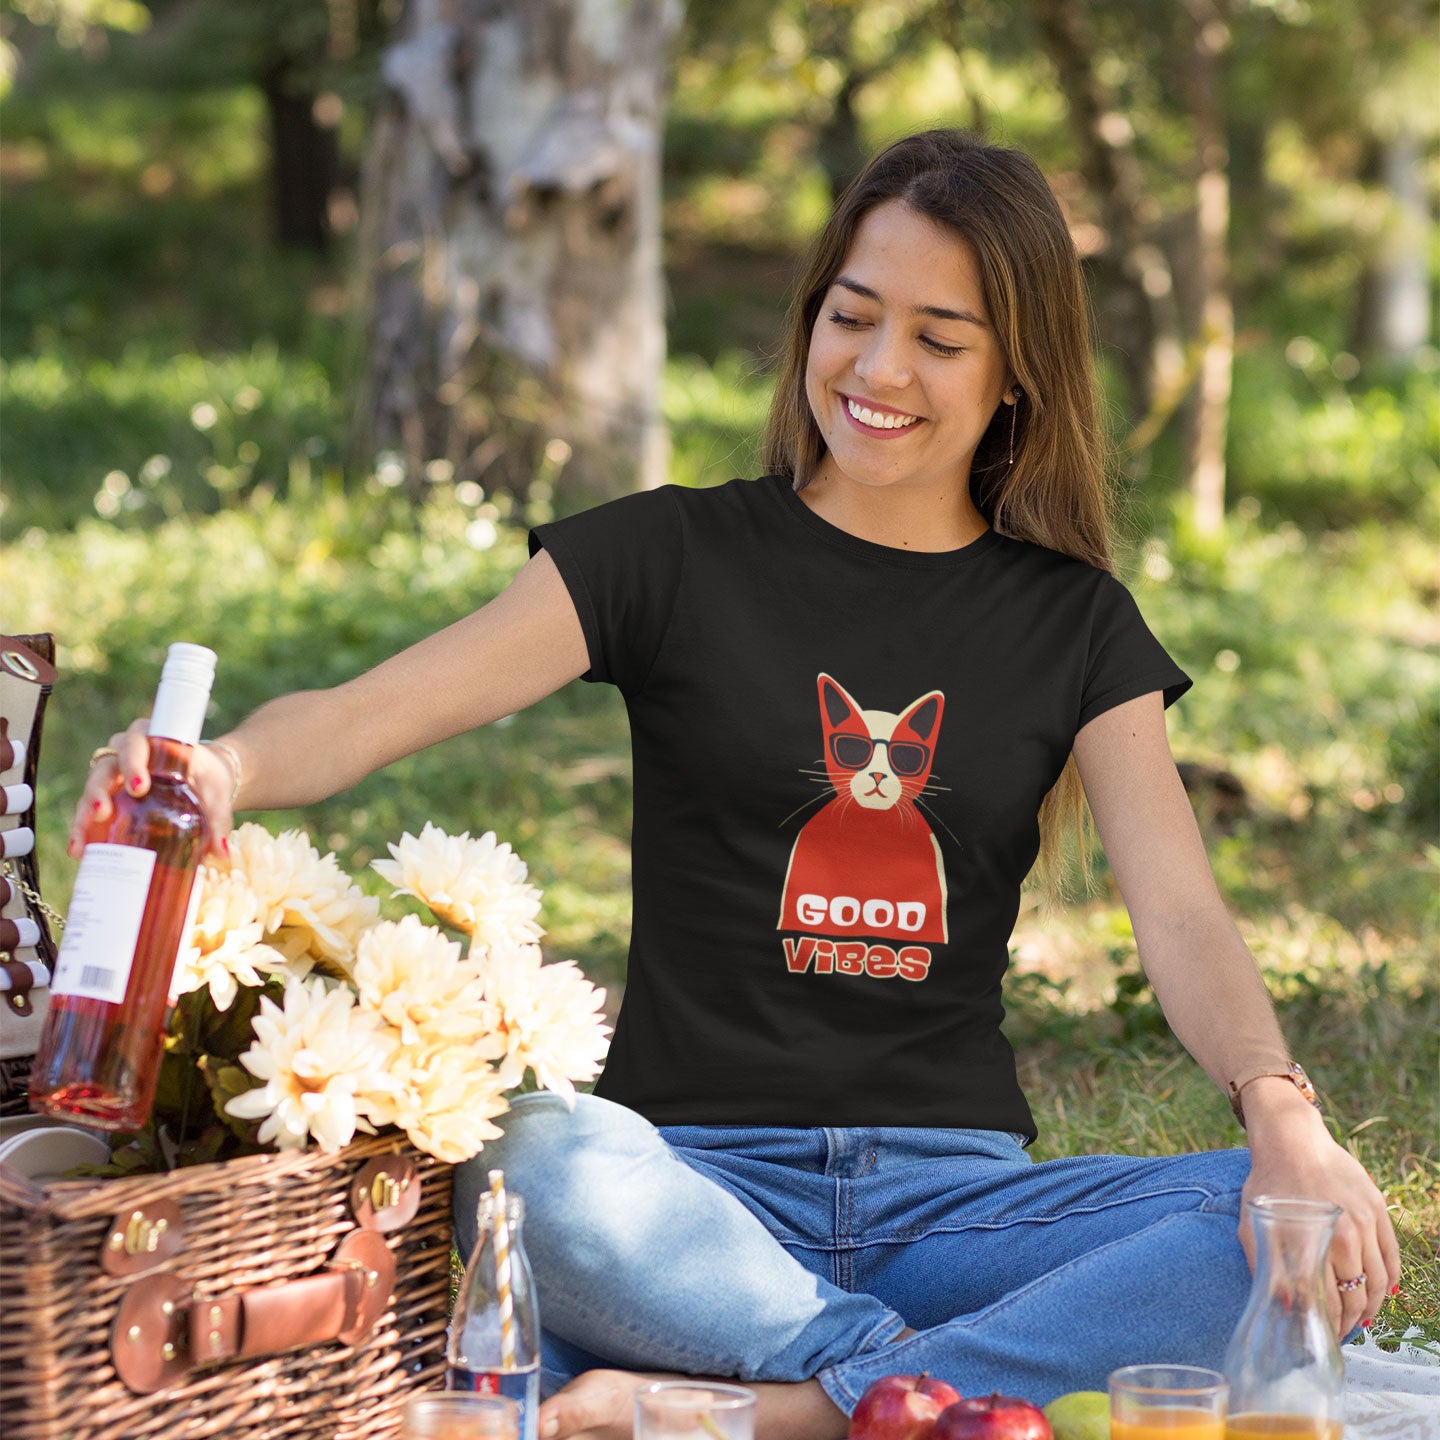 Woman having a picnic wearing a black t-shirt with a cool good vibes cat print